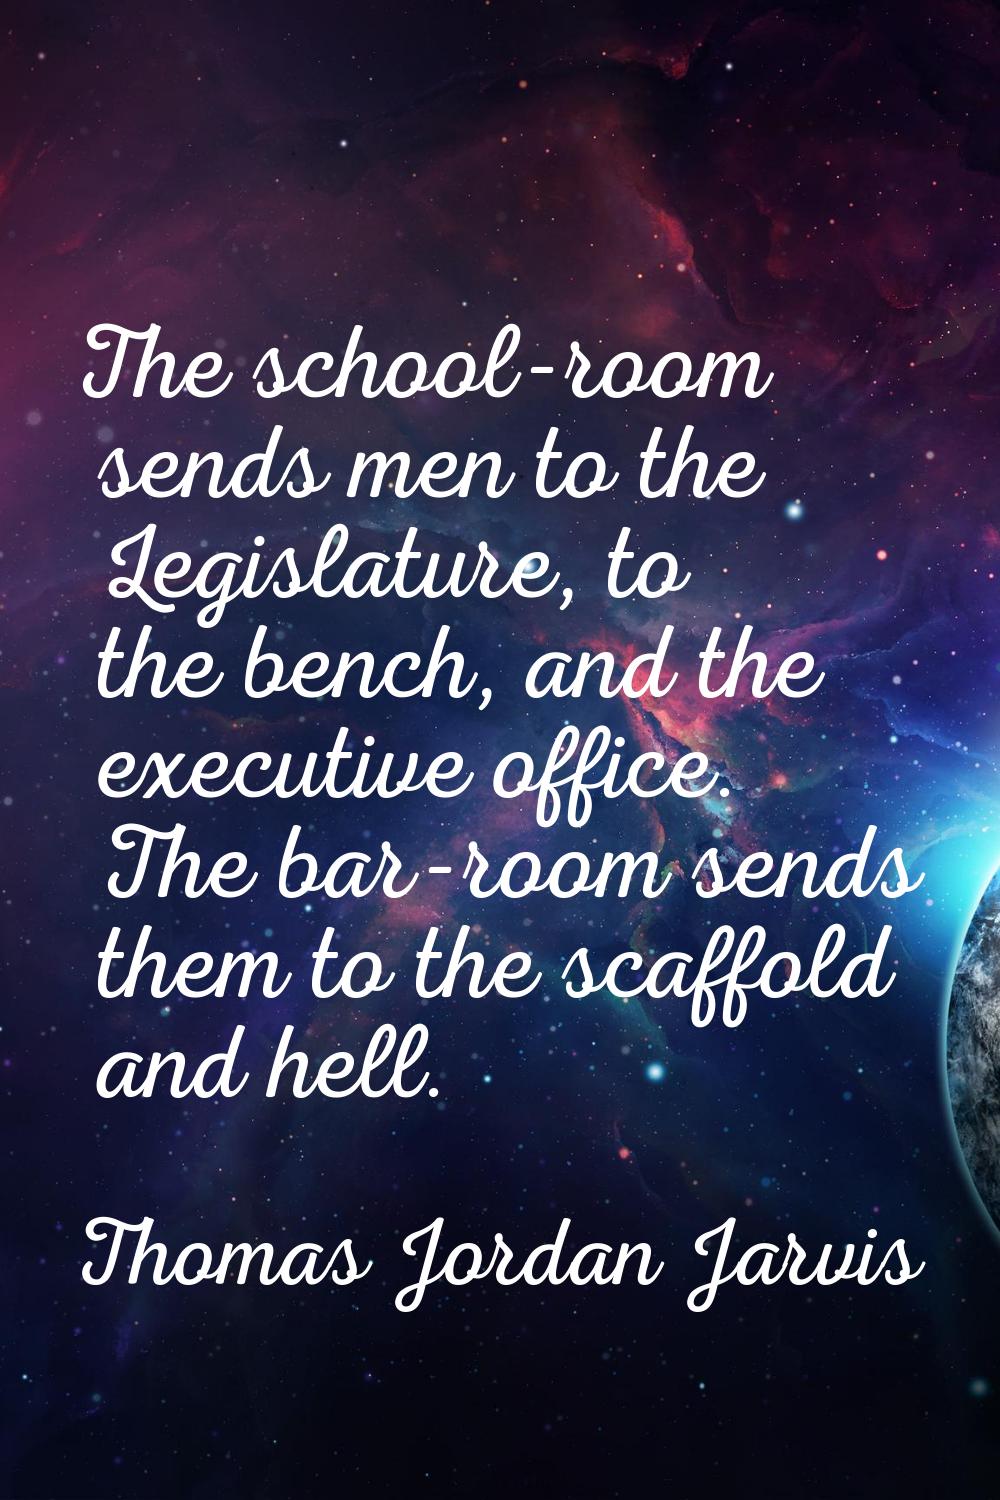 The school-room sends men to the Legislature, to the bench, and the executive office. The bar-room 